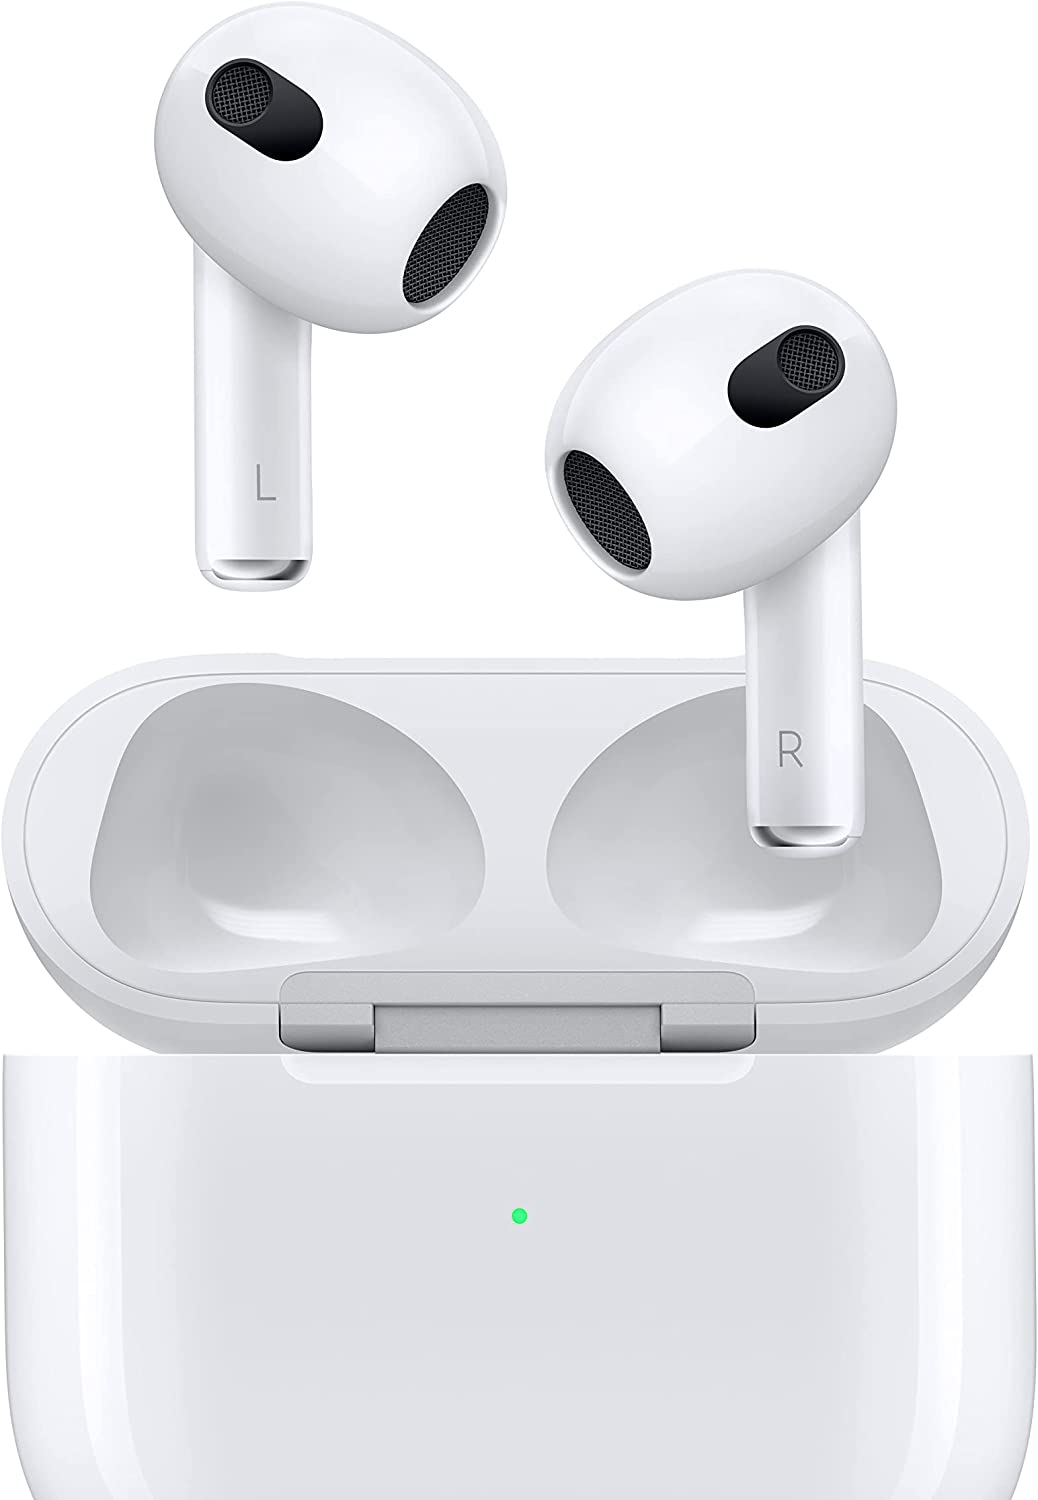 Apple AirPods (3rd Generation) with Lightning Charging Case - White (Refurbished)